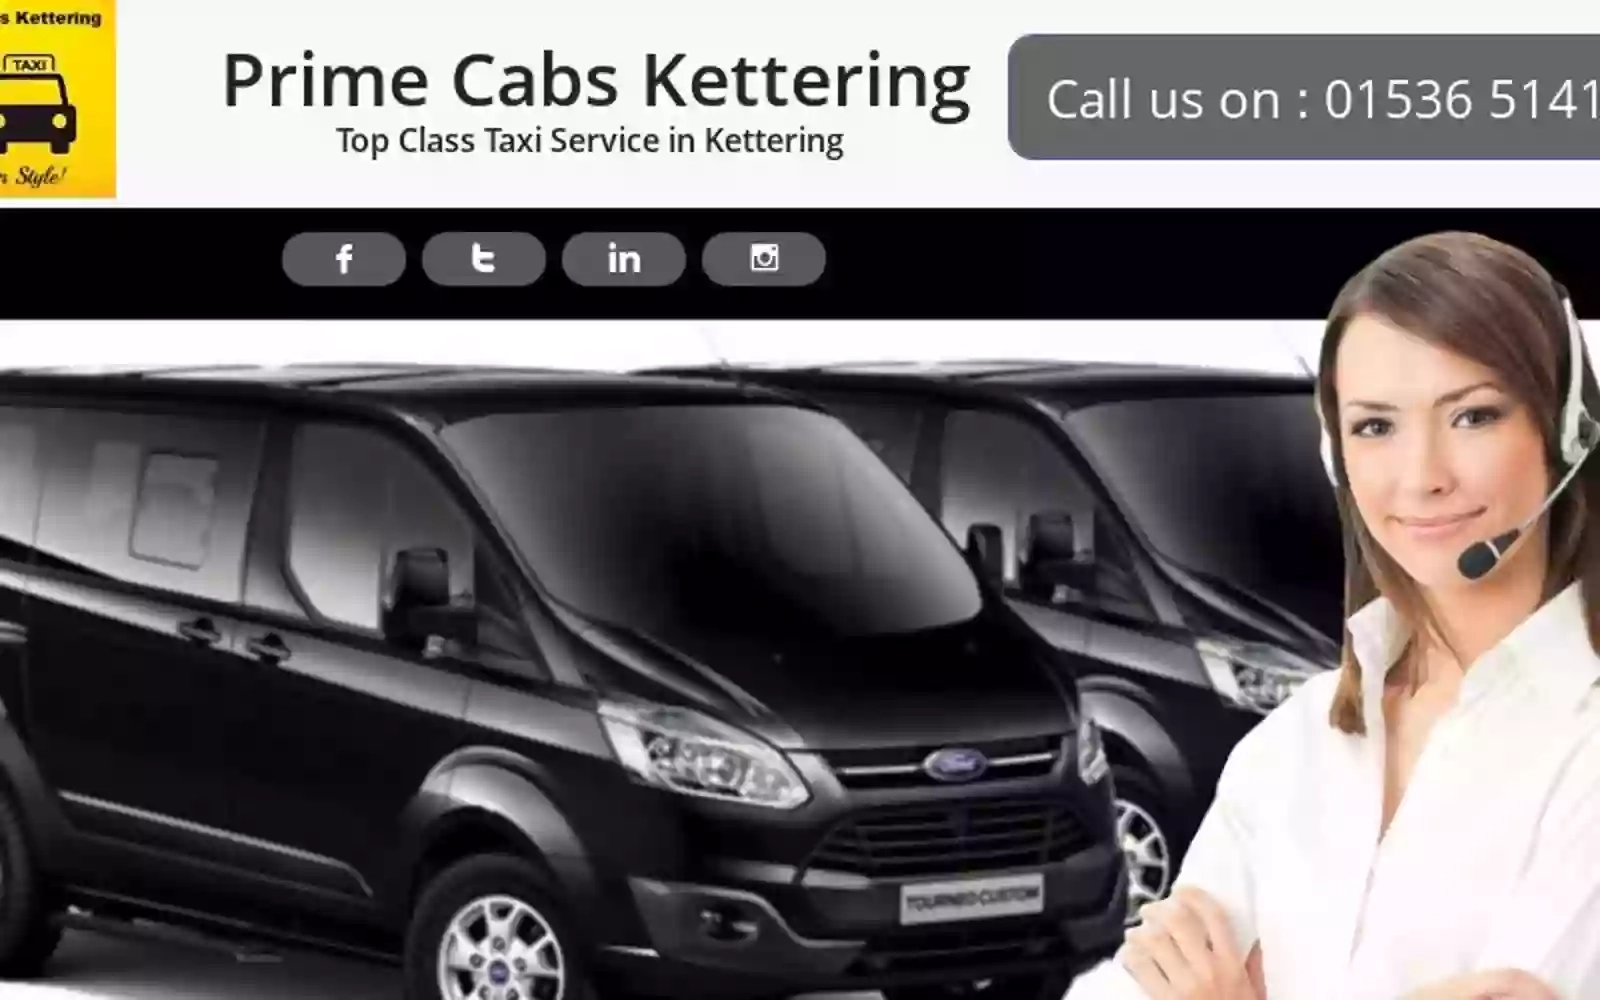 Prime Cabs Kettering